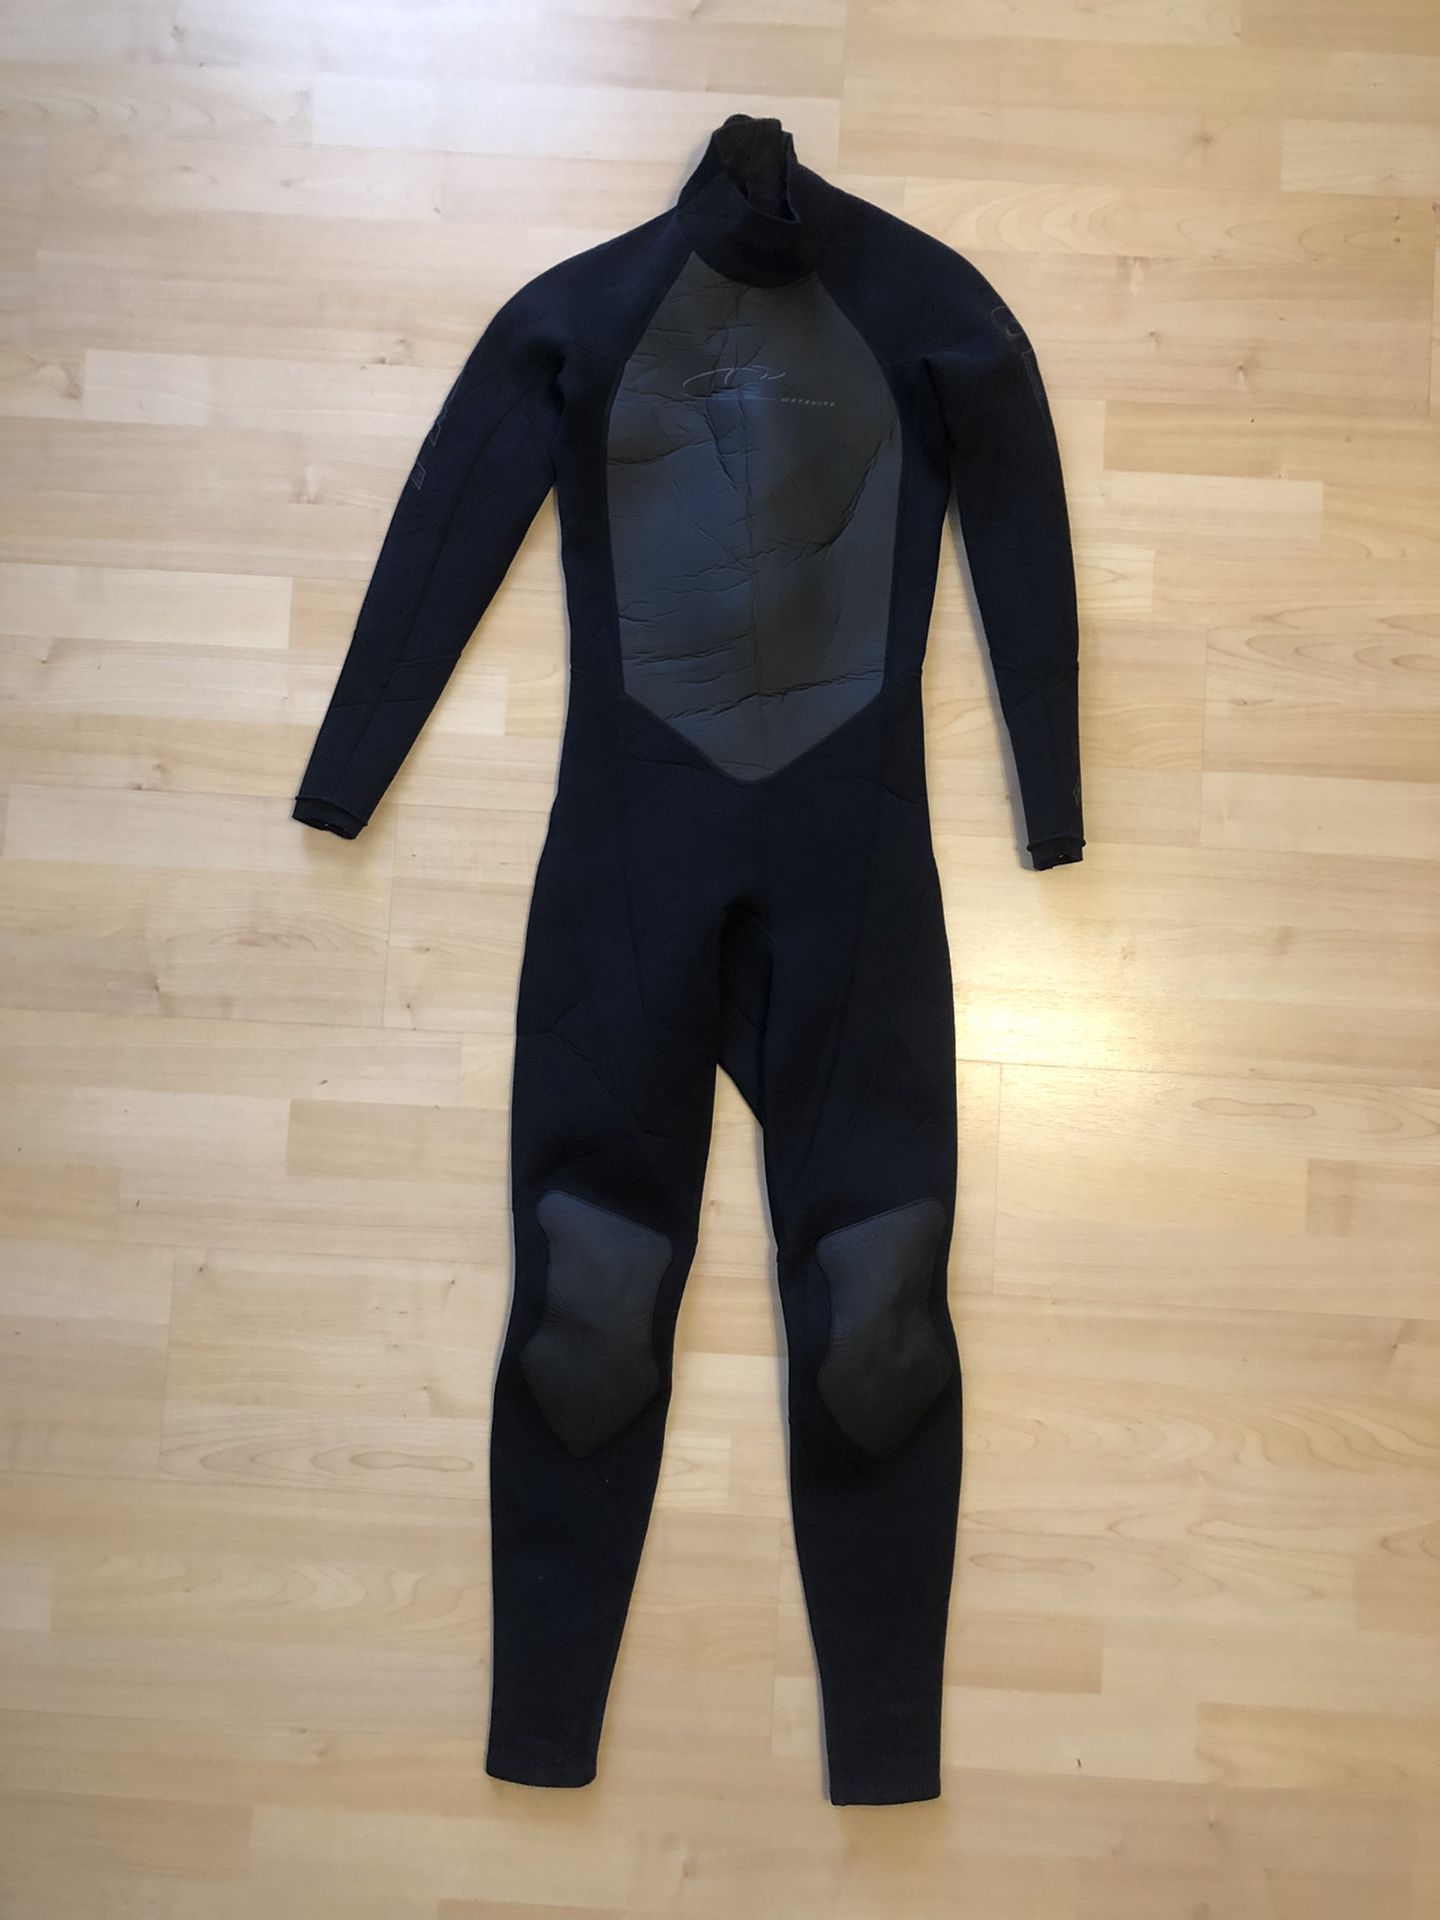 O'Neill 3mm Full Wetsuit Men’s XS Excellent Condition!